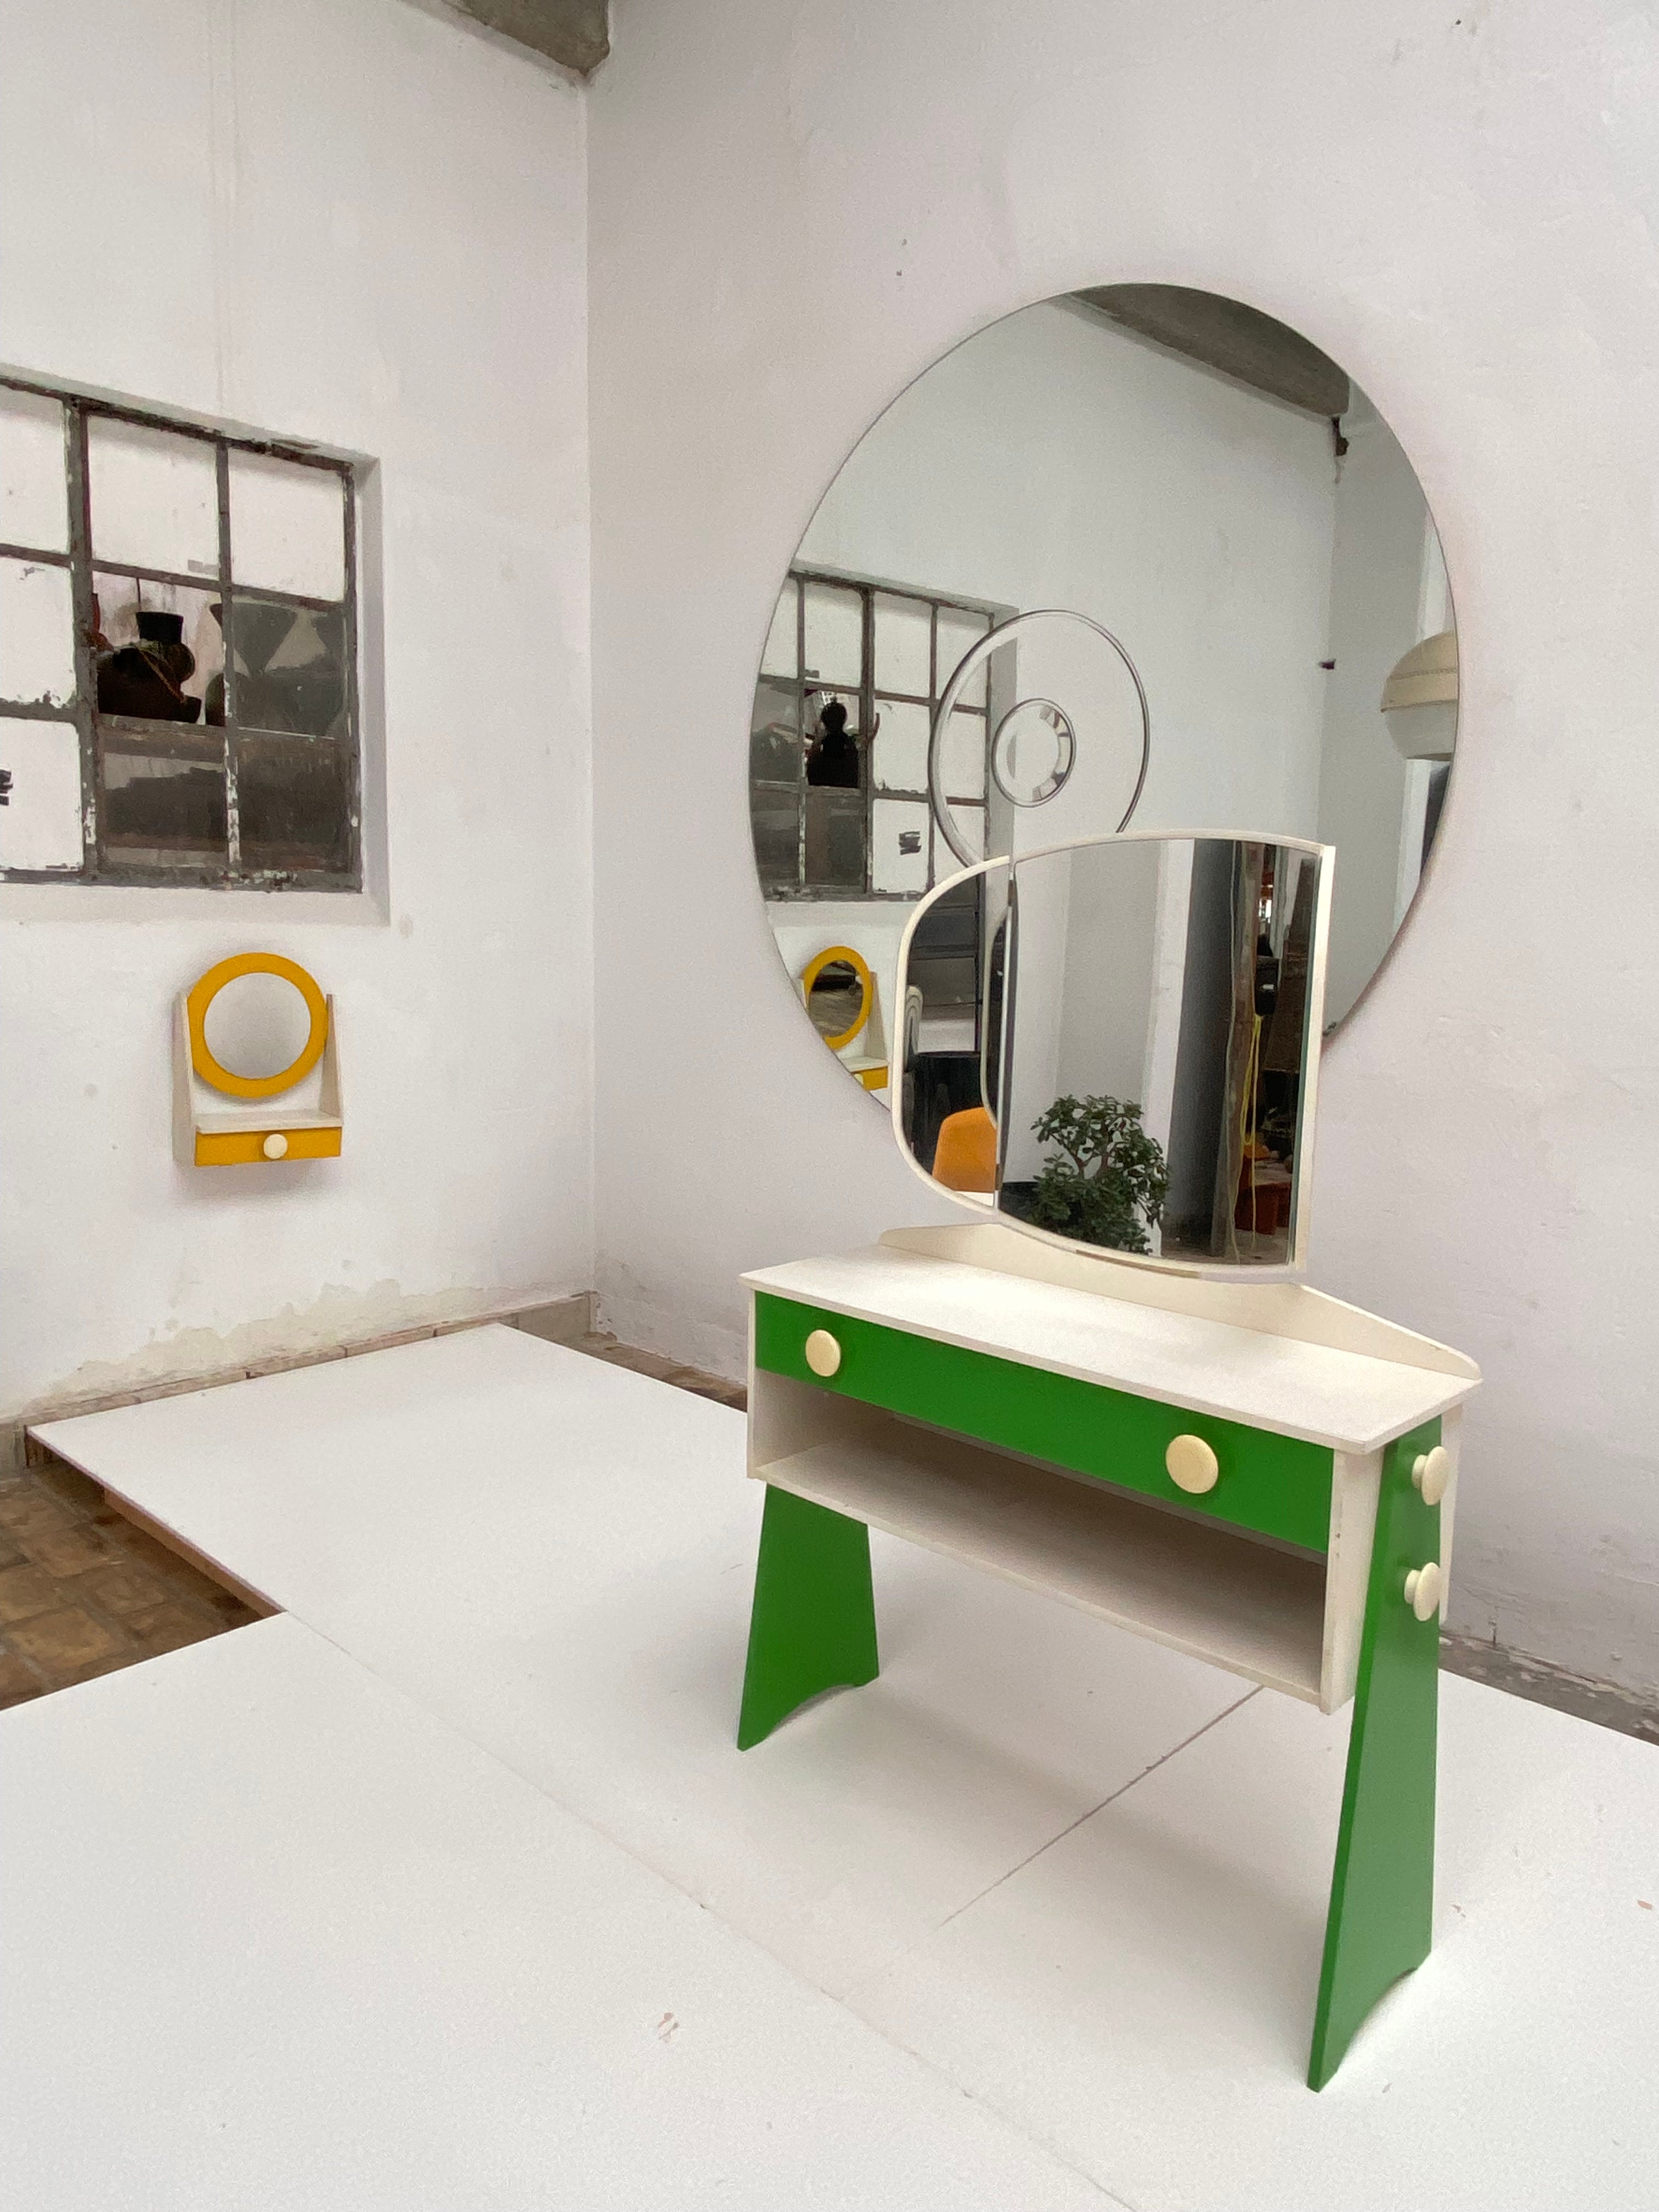 Fantastic 1970's Space Age Bedroom Vanity / Dressing Table 

The Vanity has an adjustable mirror and a drawer unit for storing your make up goodies

A cute wall mounted mirror in yellow and white with a little storage box comes with the vanity as a